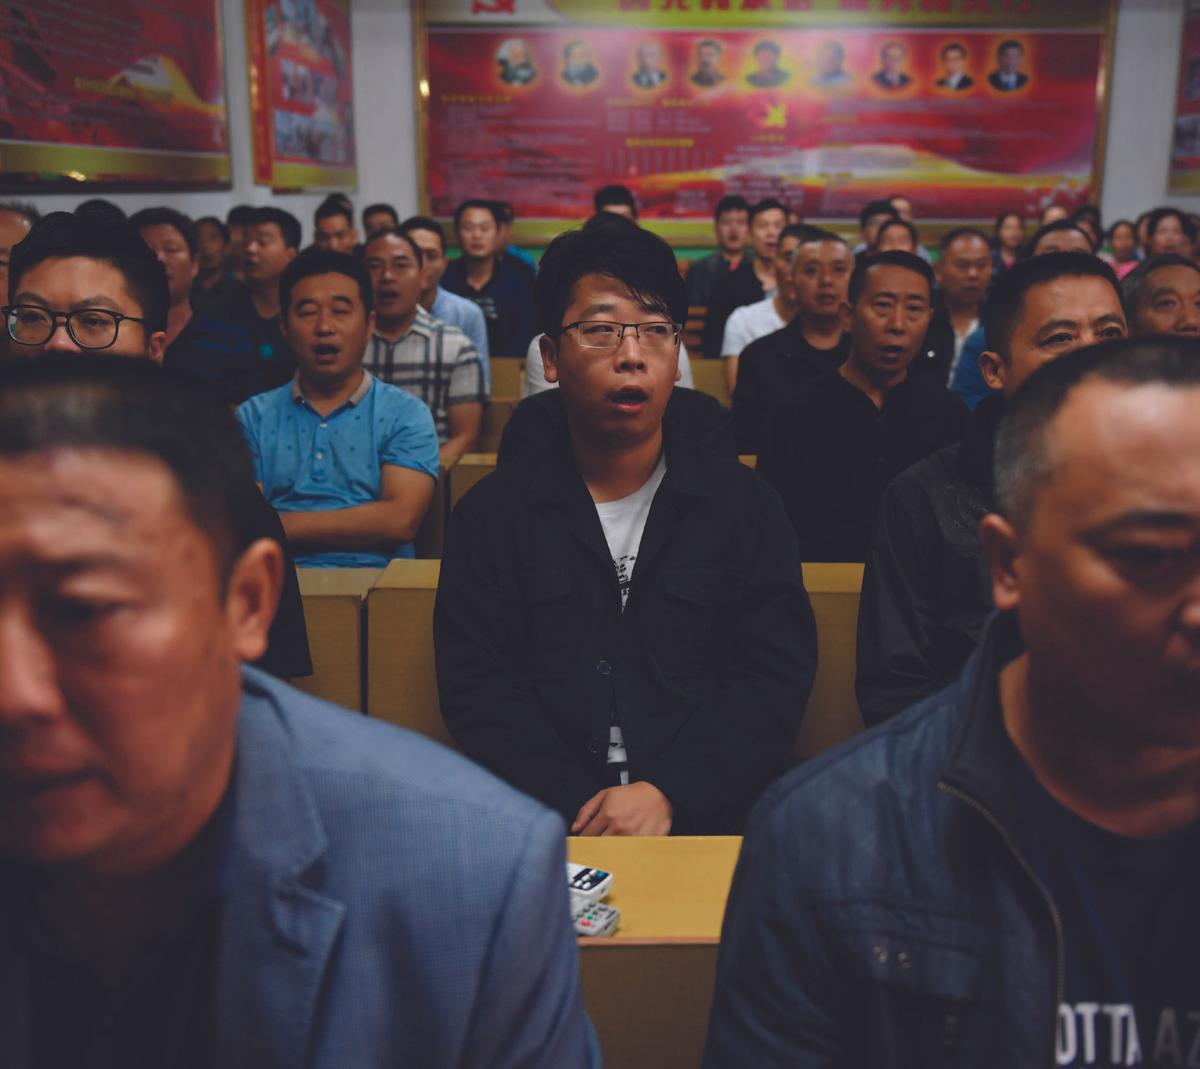 Factory managers sing communist red songs at the start of their work day in Nanjie Village, in China’s central<br/>Henan Province, on Sept. 27, 2017. (GREG BAKER/AFP/GETTY IMAGES)